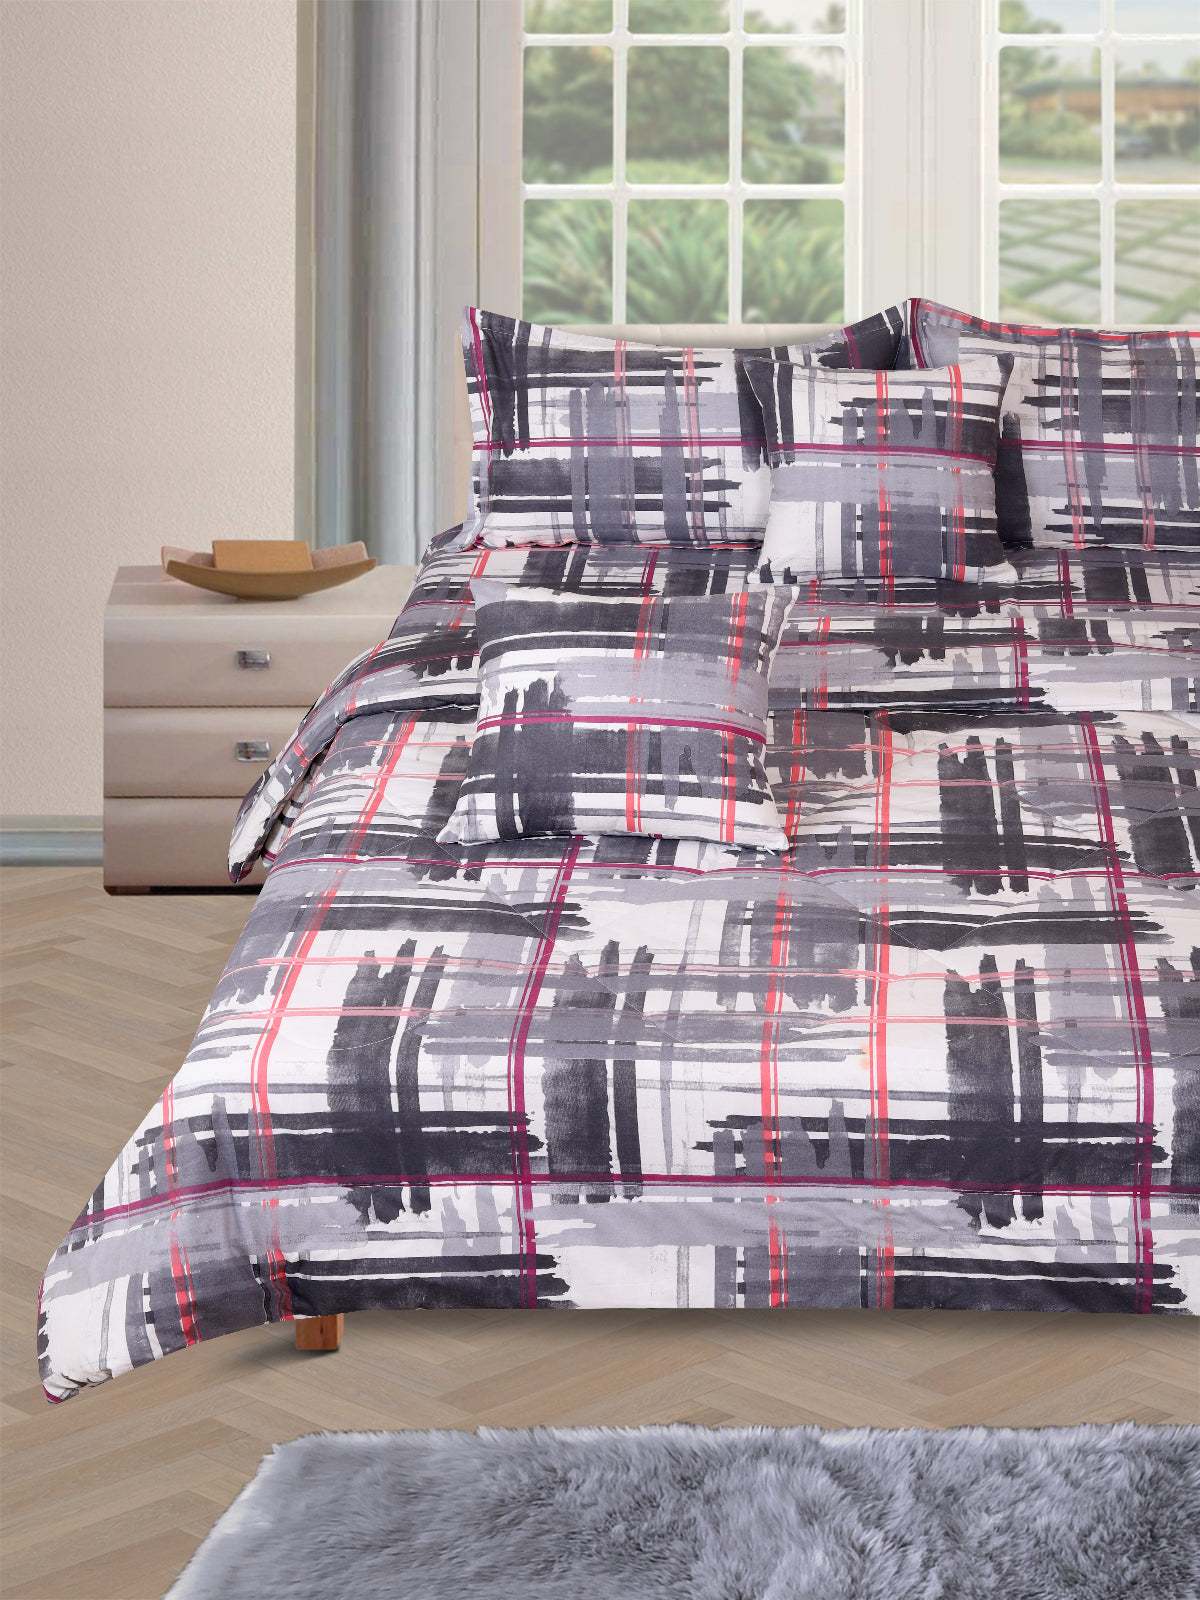 Grey & White Check Printed Cotton Double Queen Bedding Set With Pillow Cover